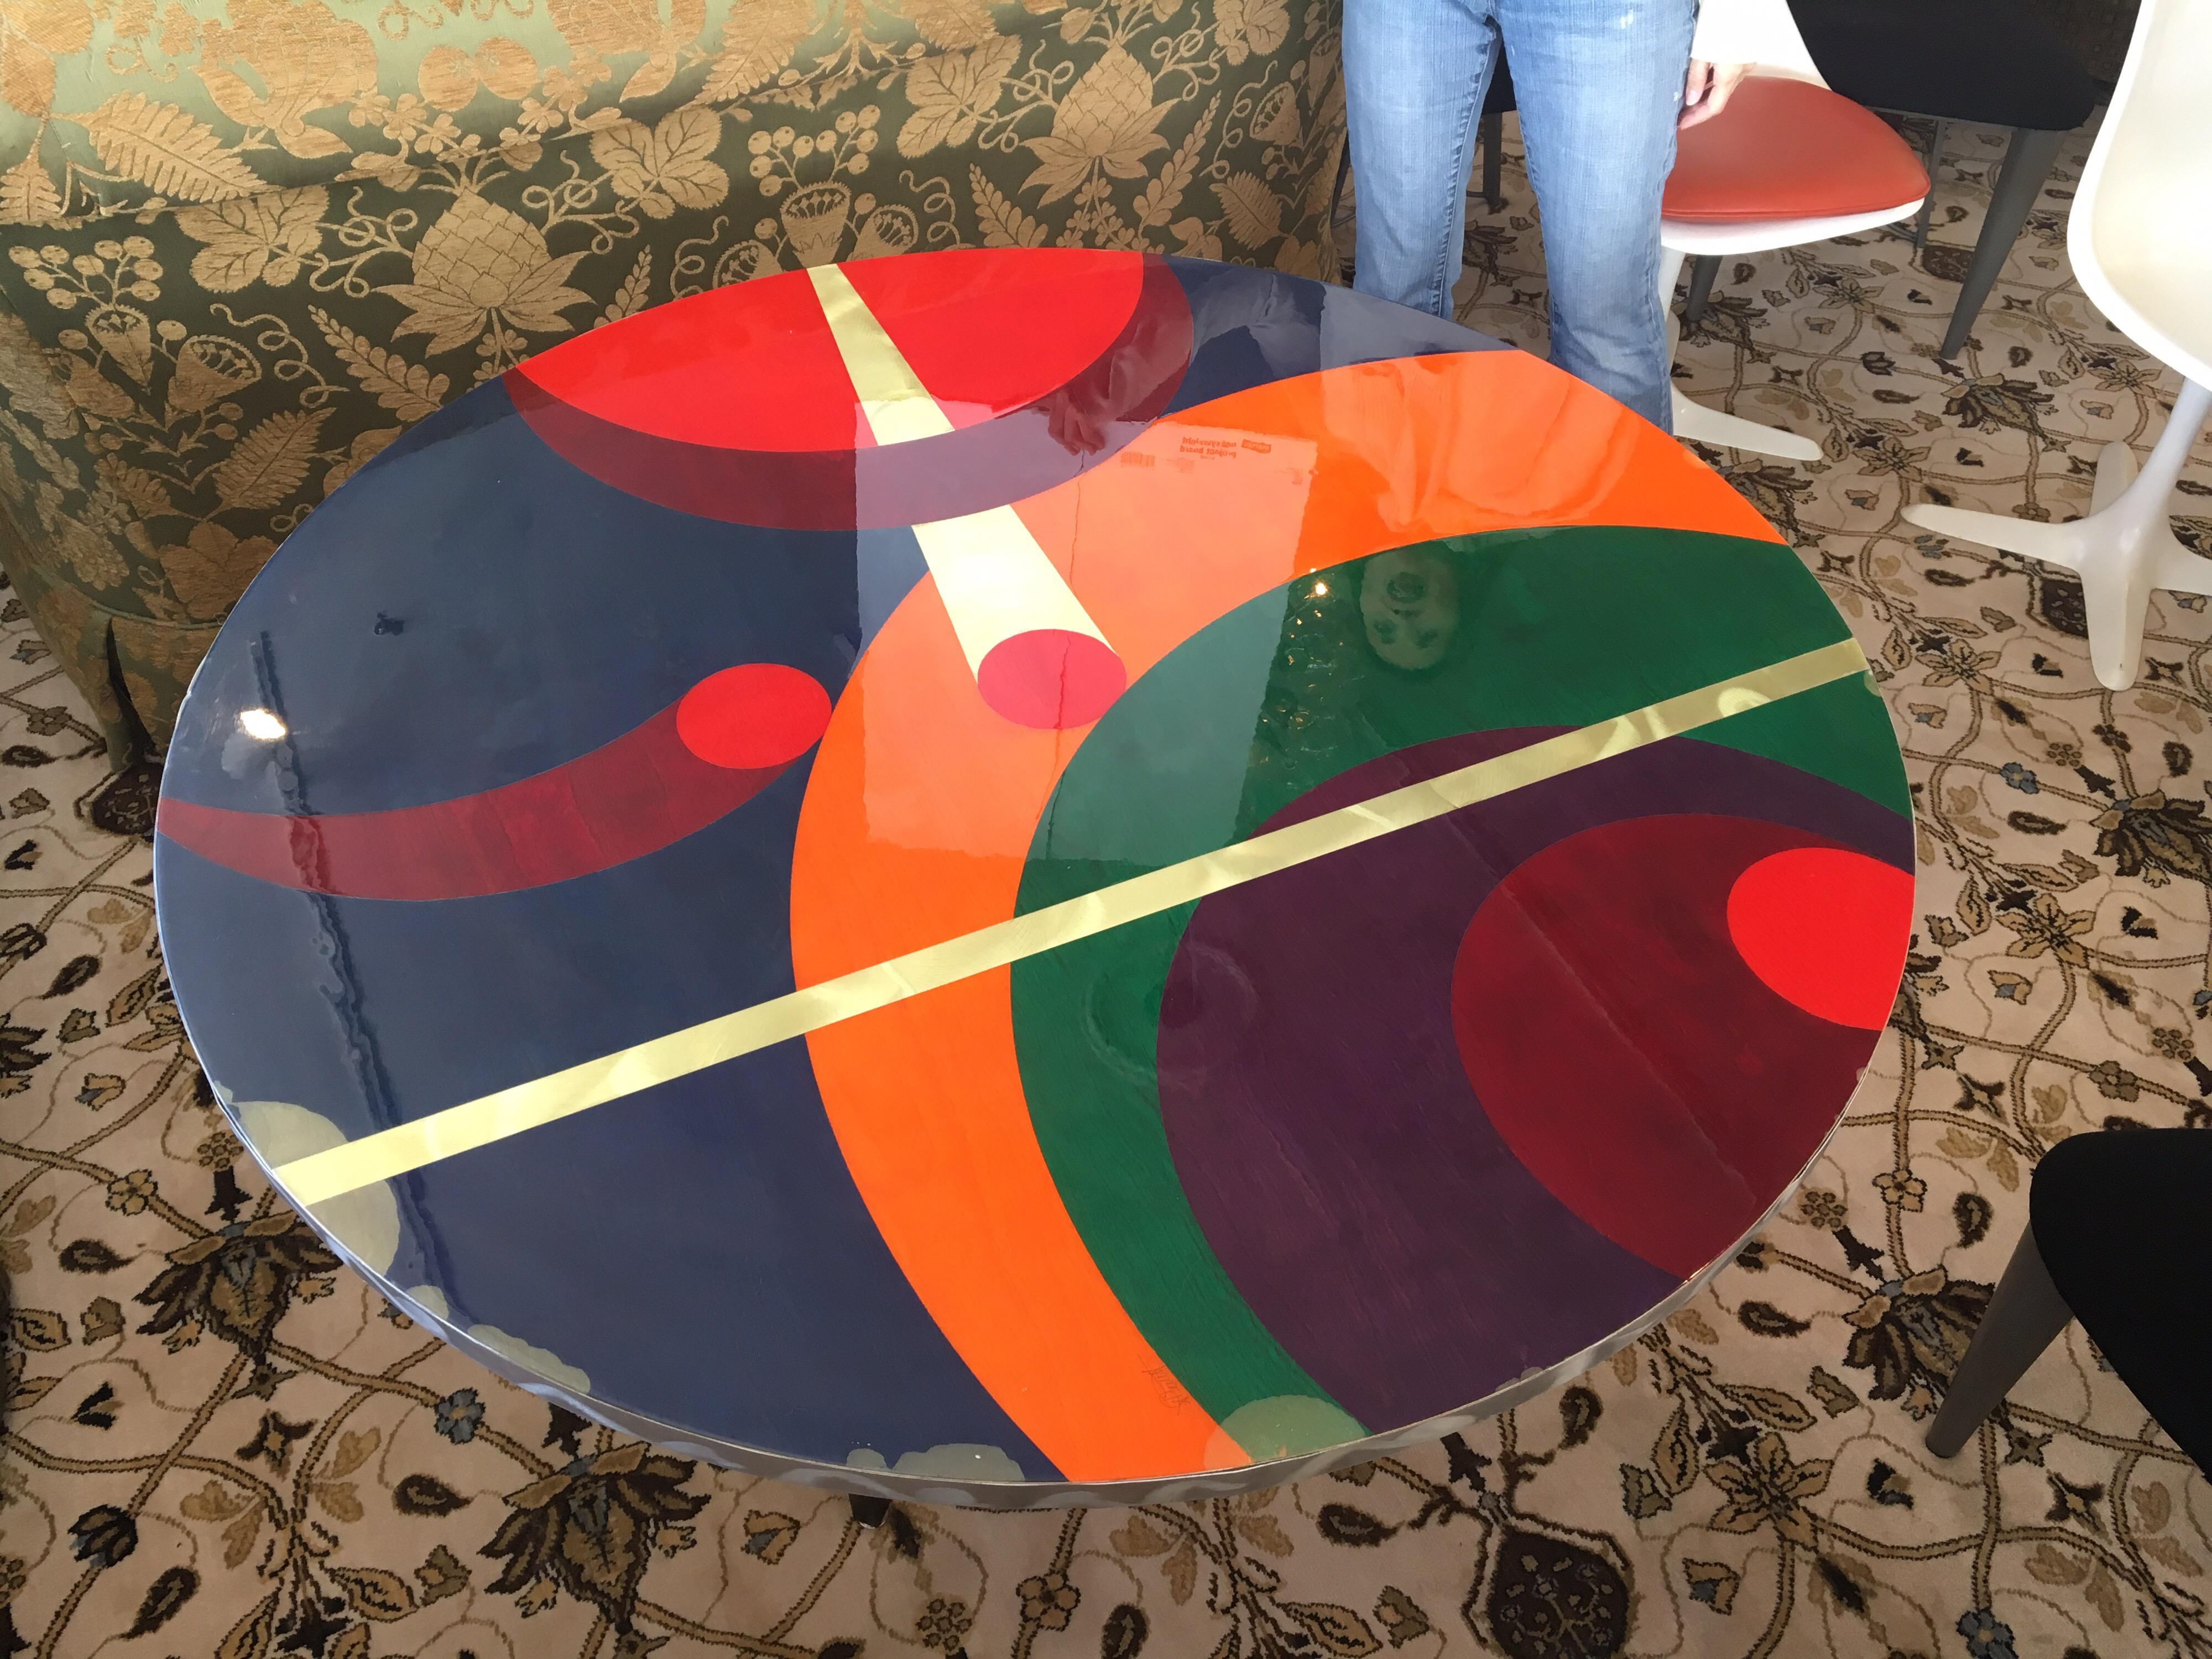 Artist-signed Postmodern round dining or kitchen table. Artist signature is at top of table and is hard to decipher - could be 